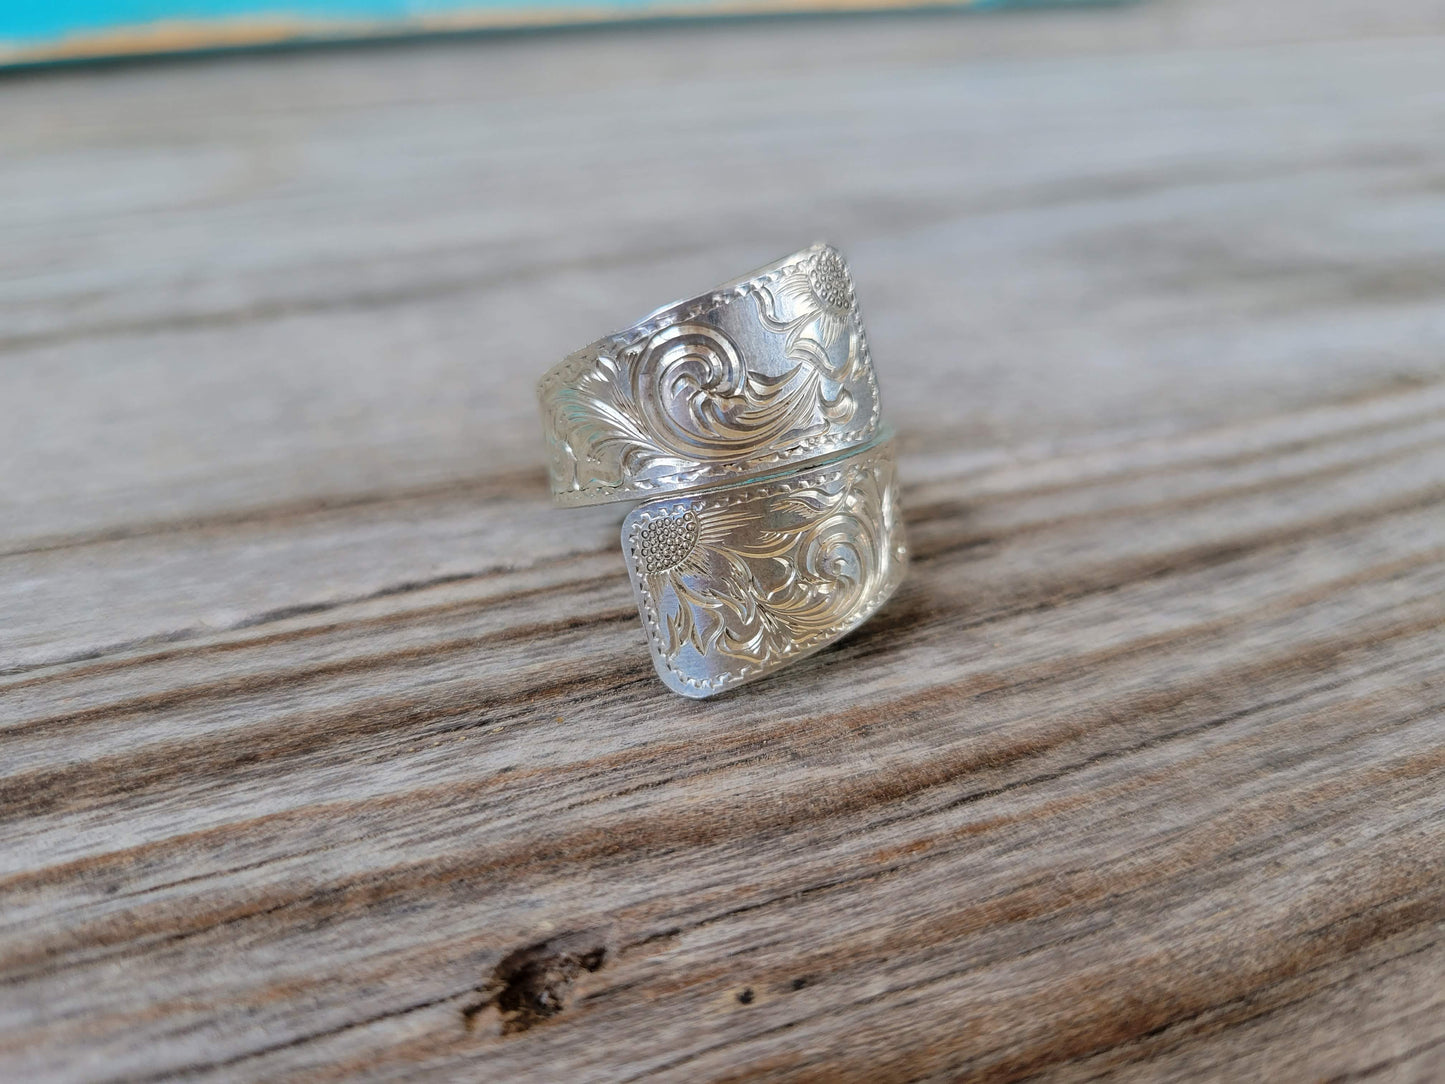 Sterling Silver Wrap Around Ring, Hand Engraved Sterling Silver, Gifts for Her